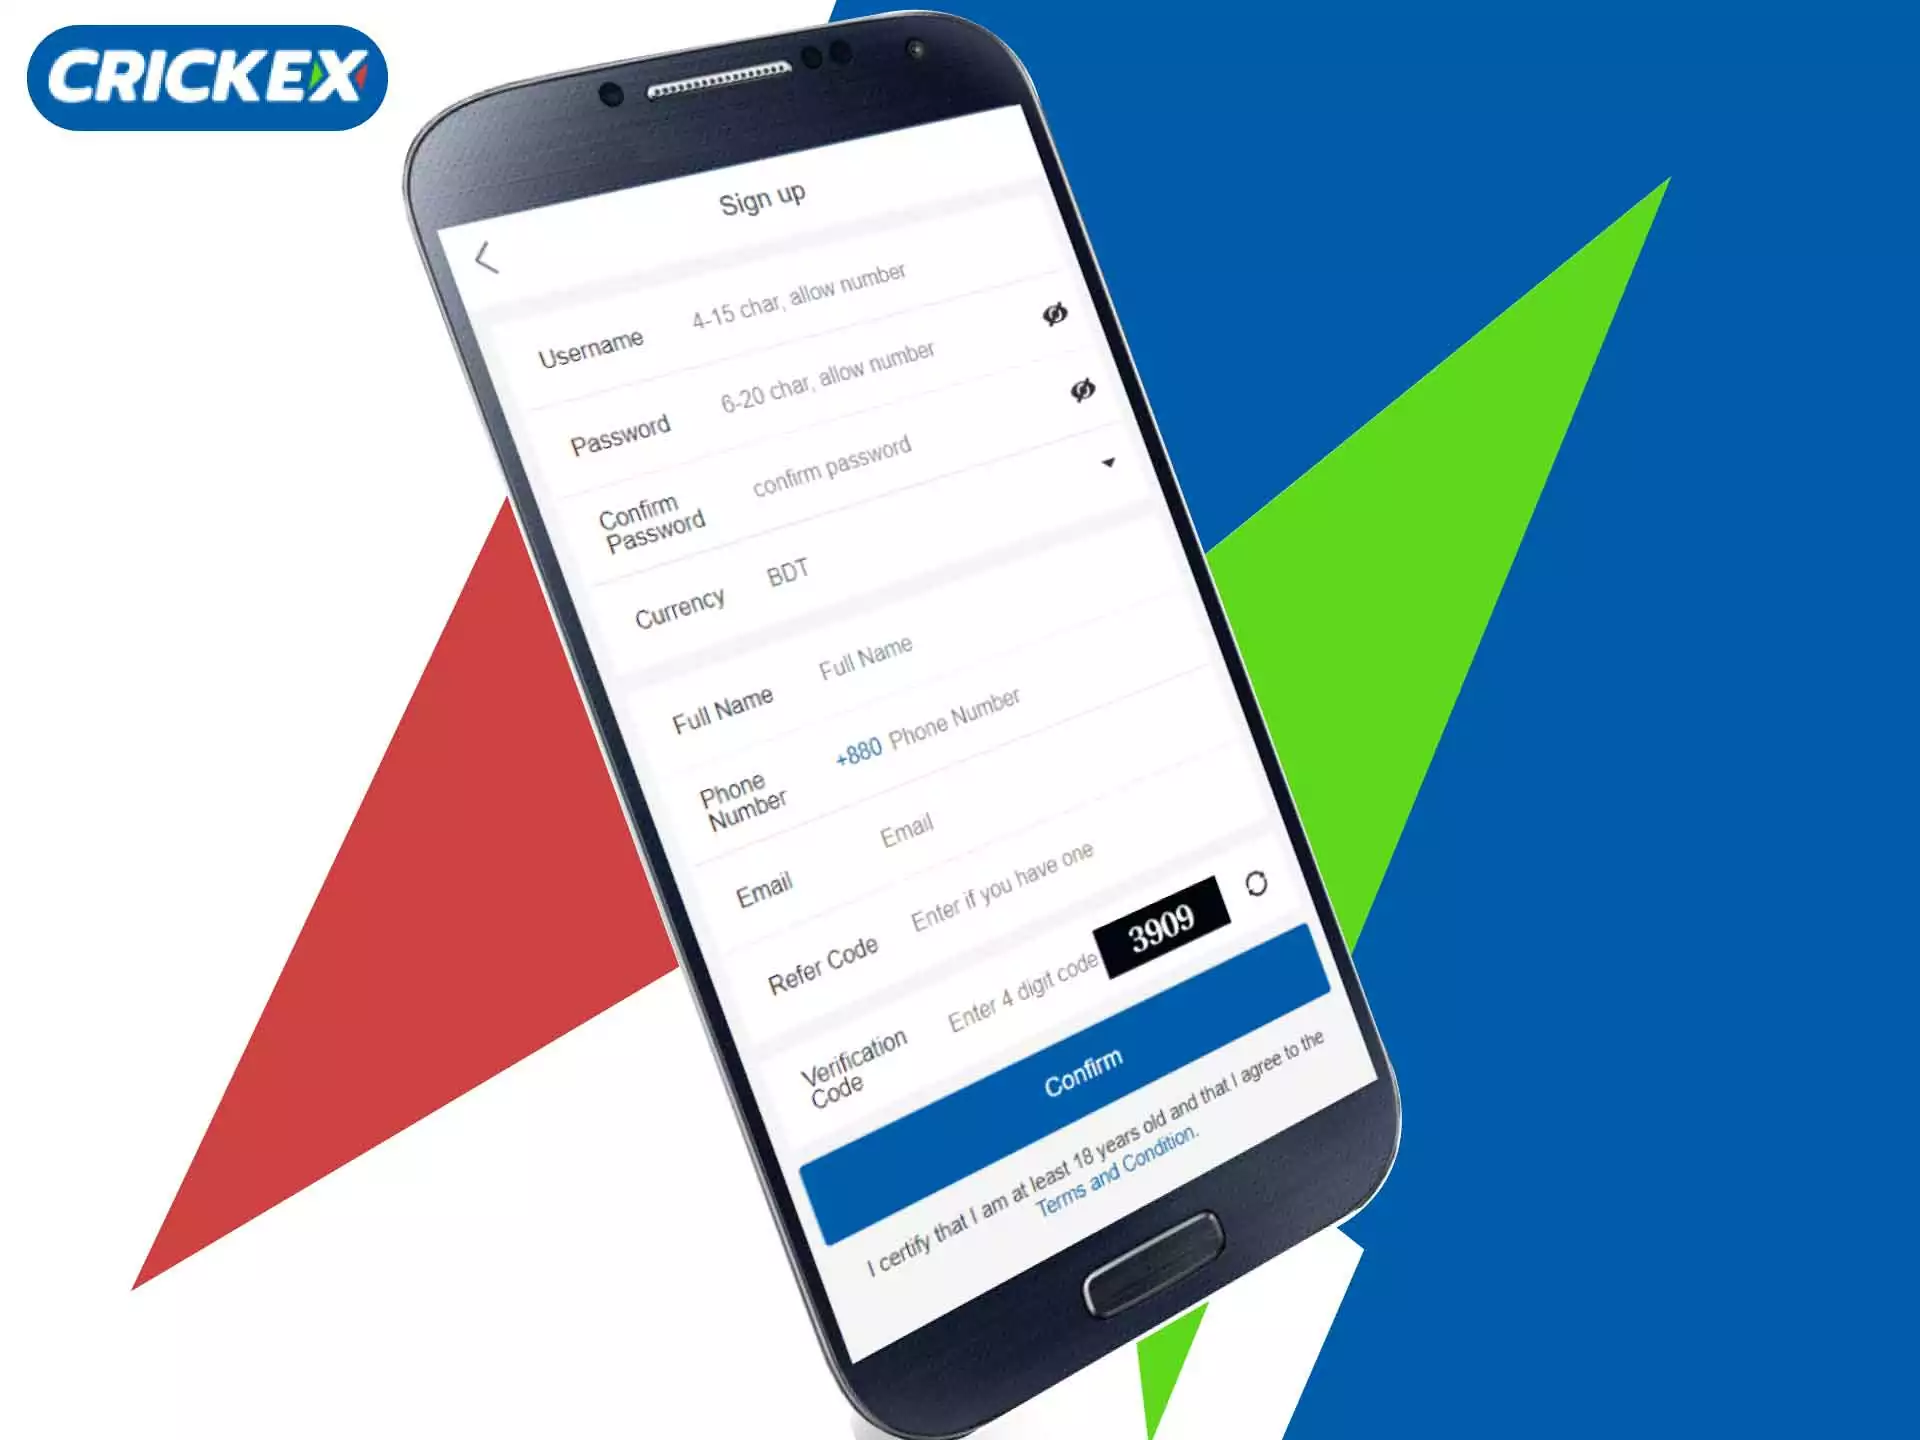 Sign up for Crickex in the app.